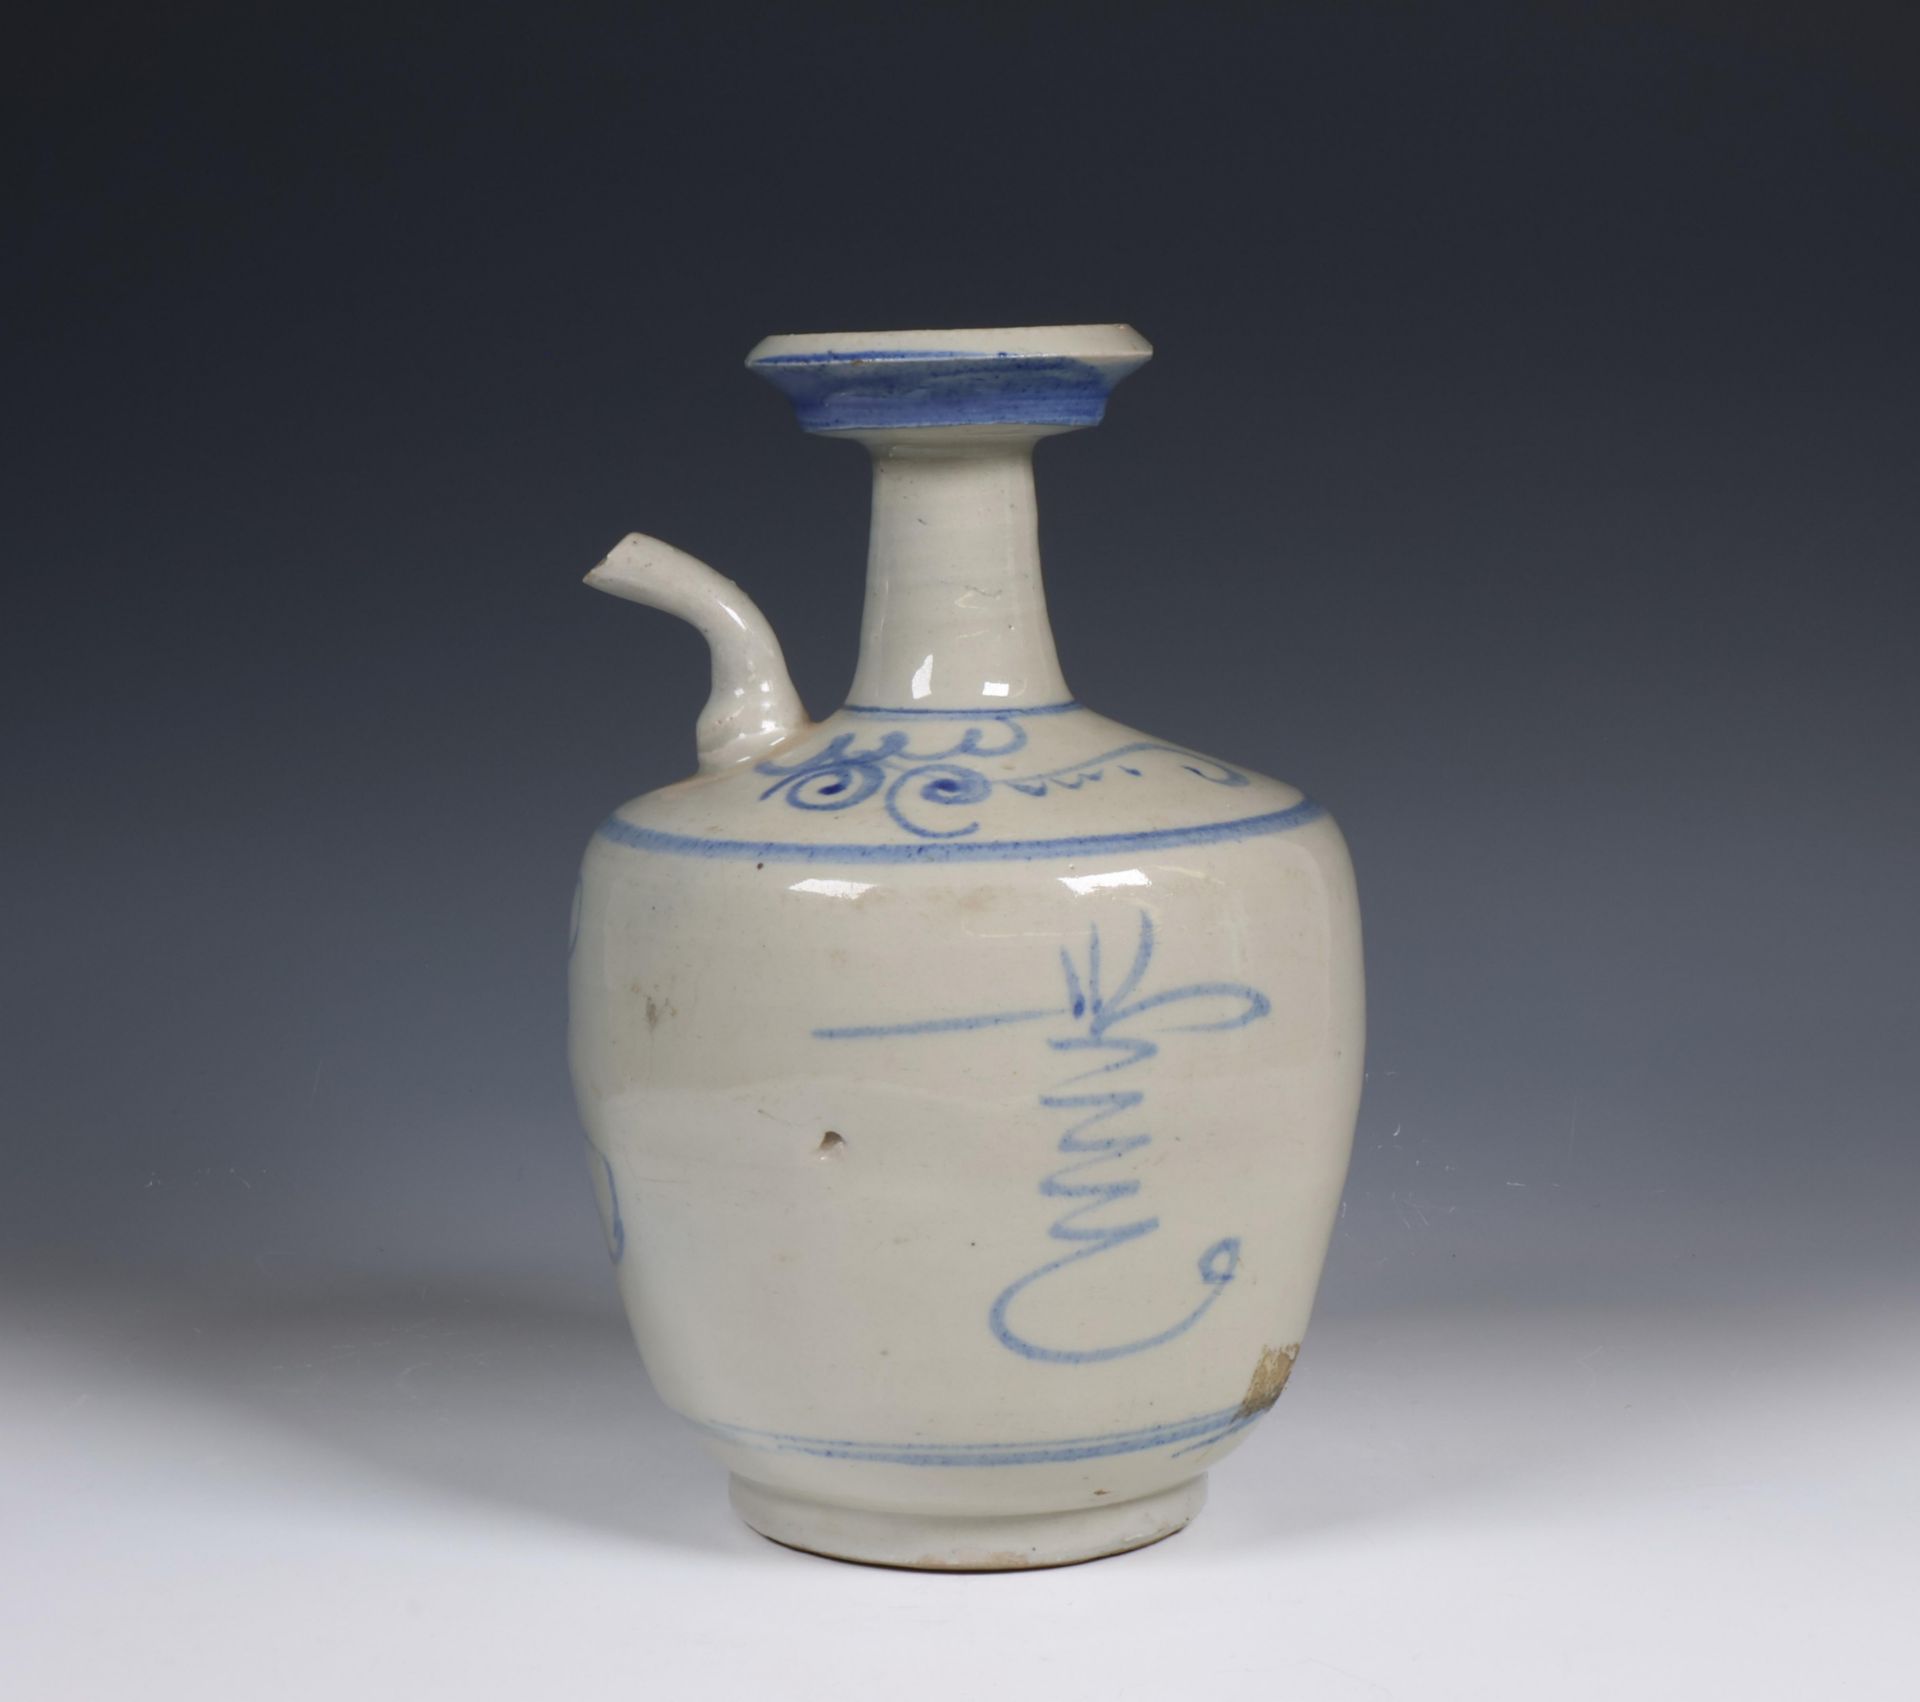 China/ Vietnam, blue and white glazed earthenware water-pot, 20th century,